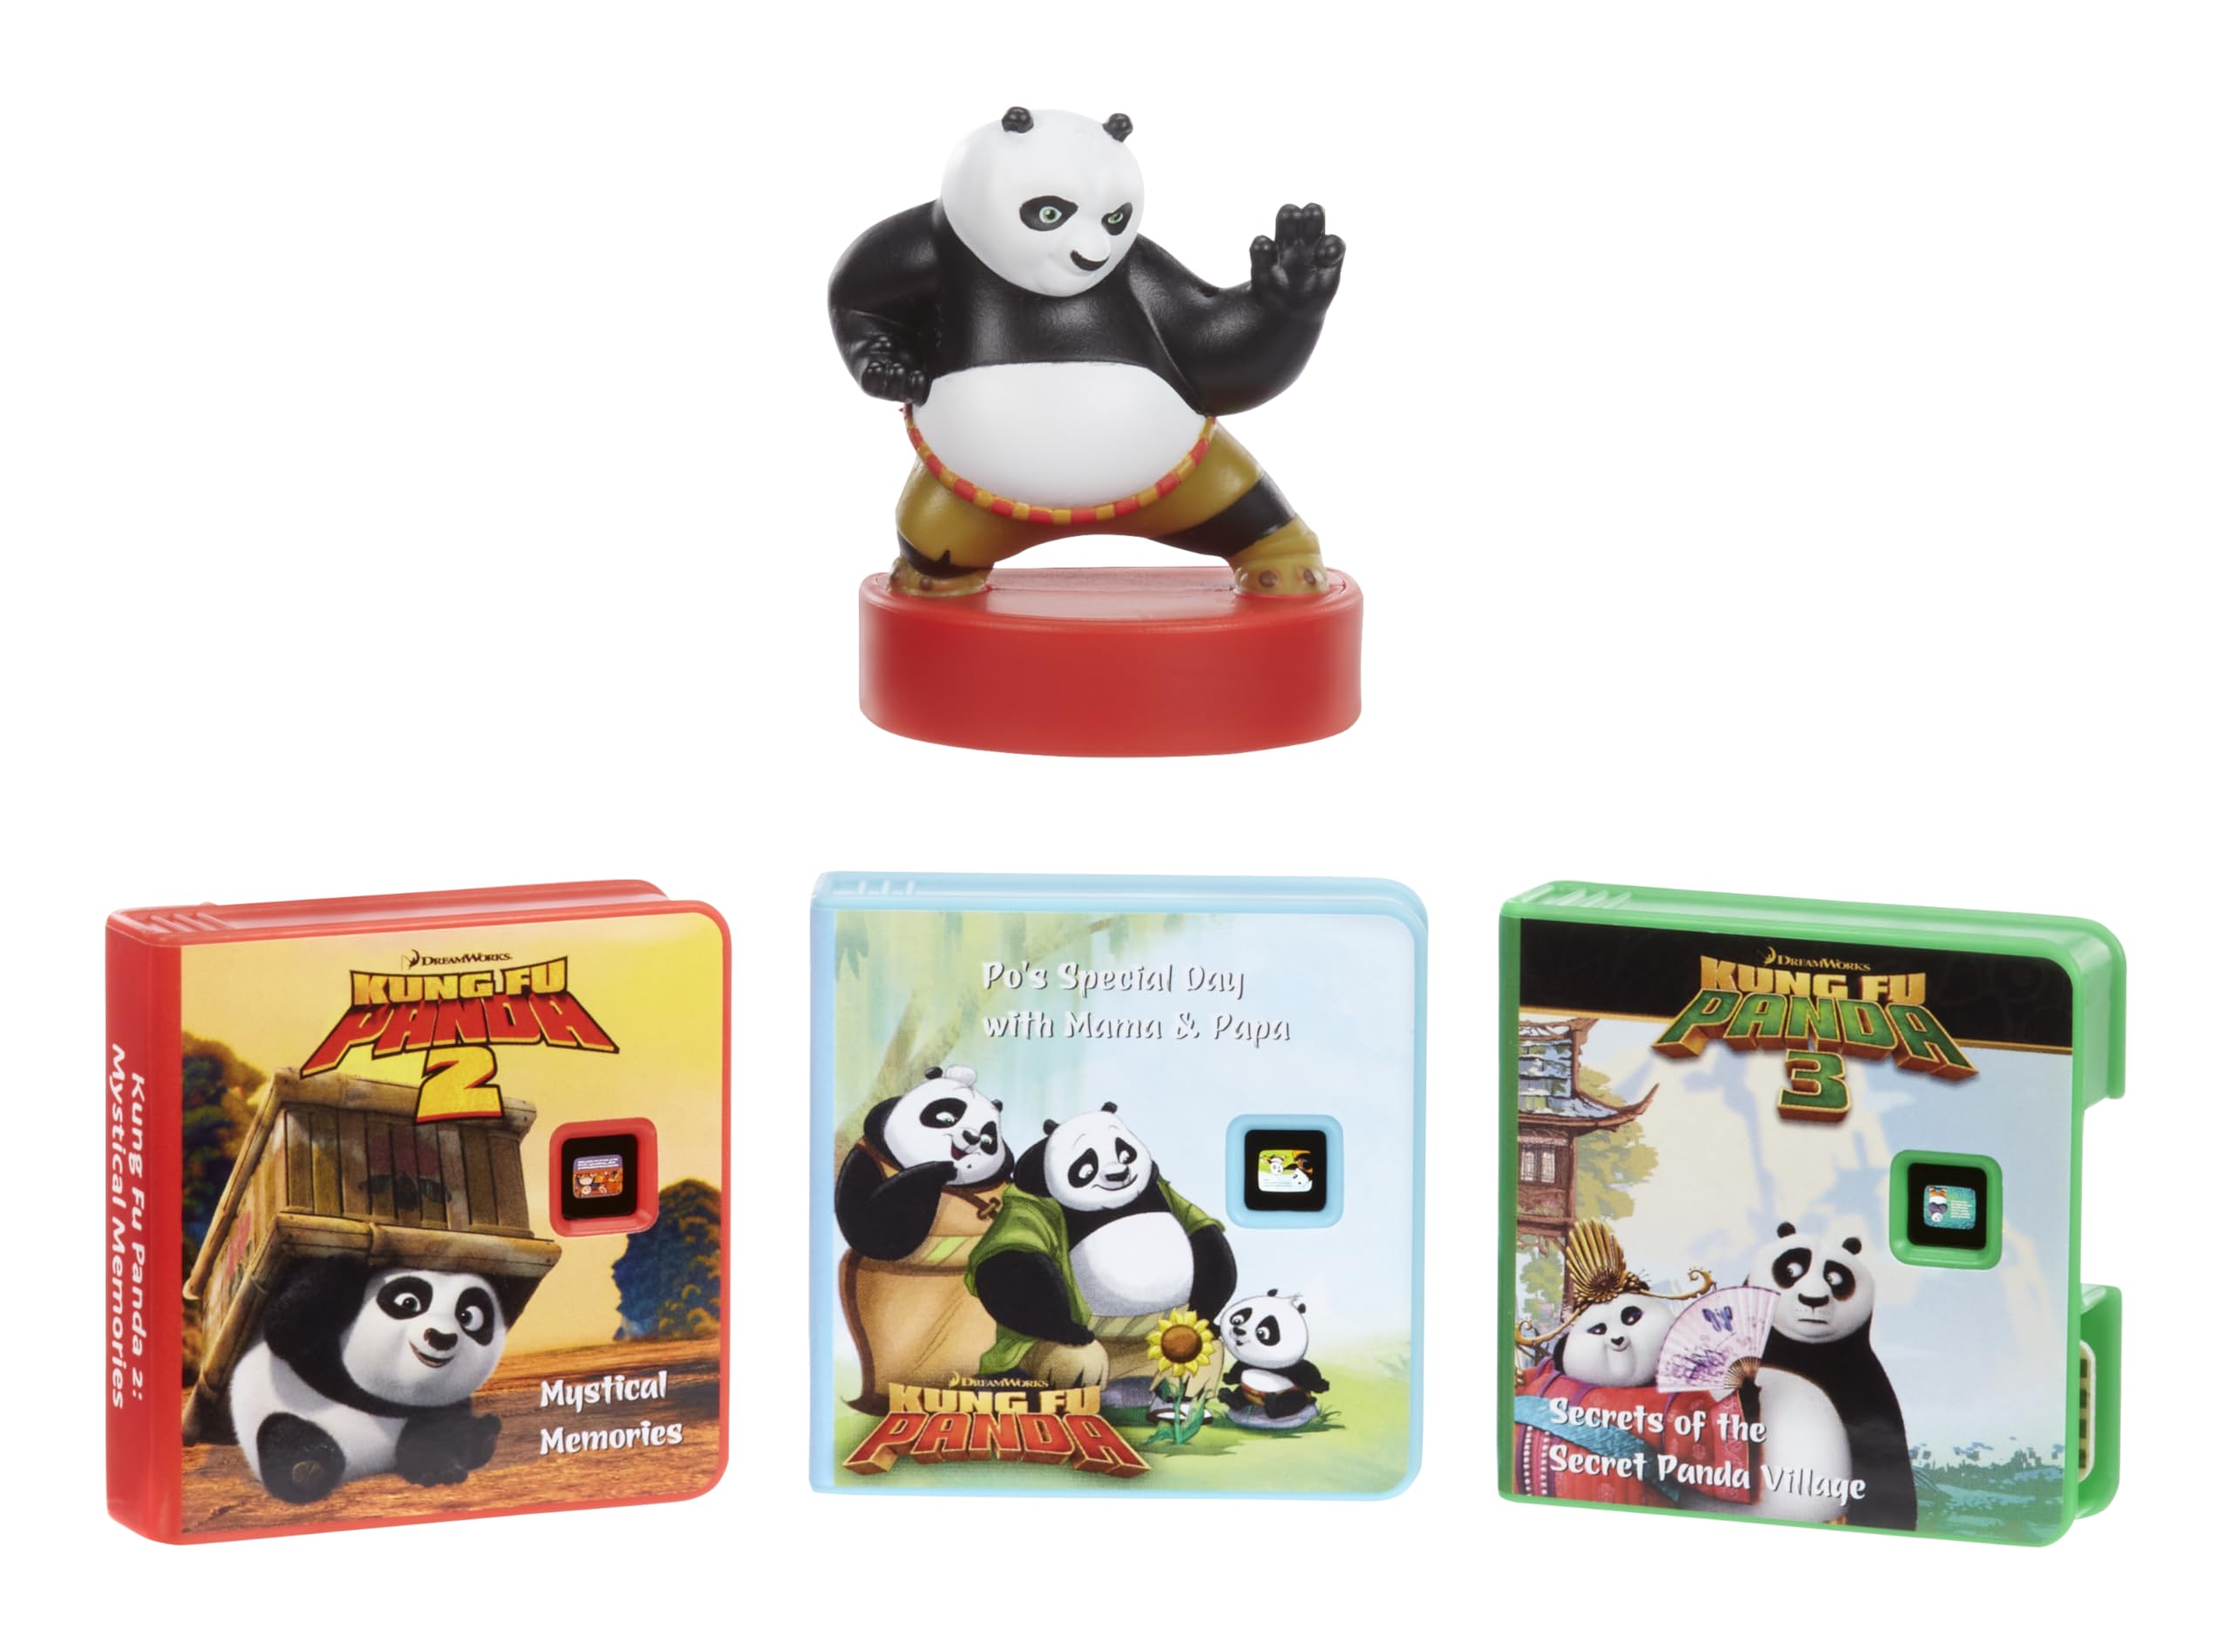 Little Tikes Story Dream Machine DreamWorks Kung Fu Panda Dragon Warrior Story Collection, Storytime, Books, DreamWorks Animation, Audio Play Character, Gift and Toy for Ages 3+ Years